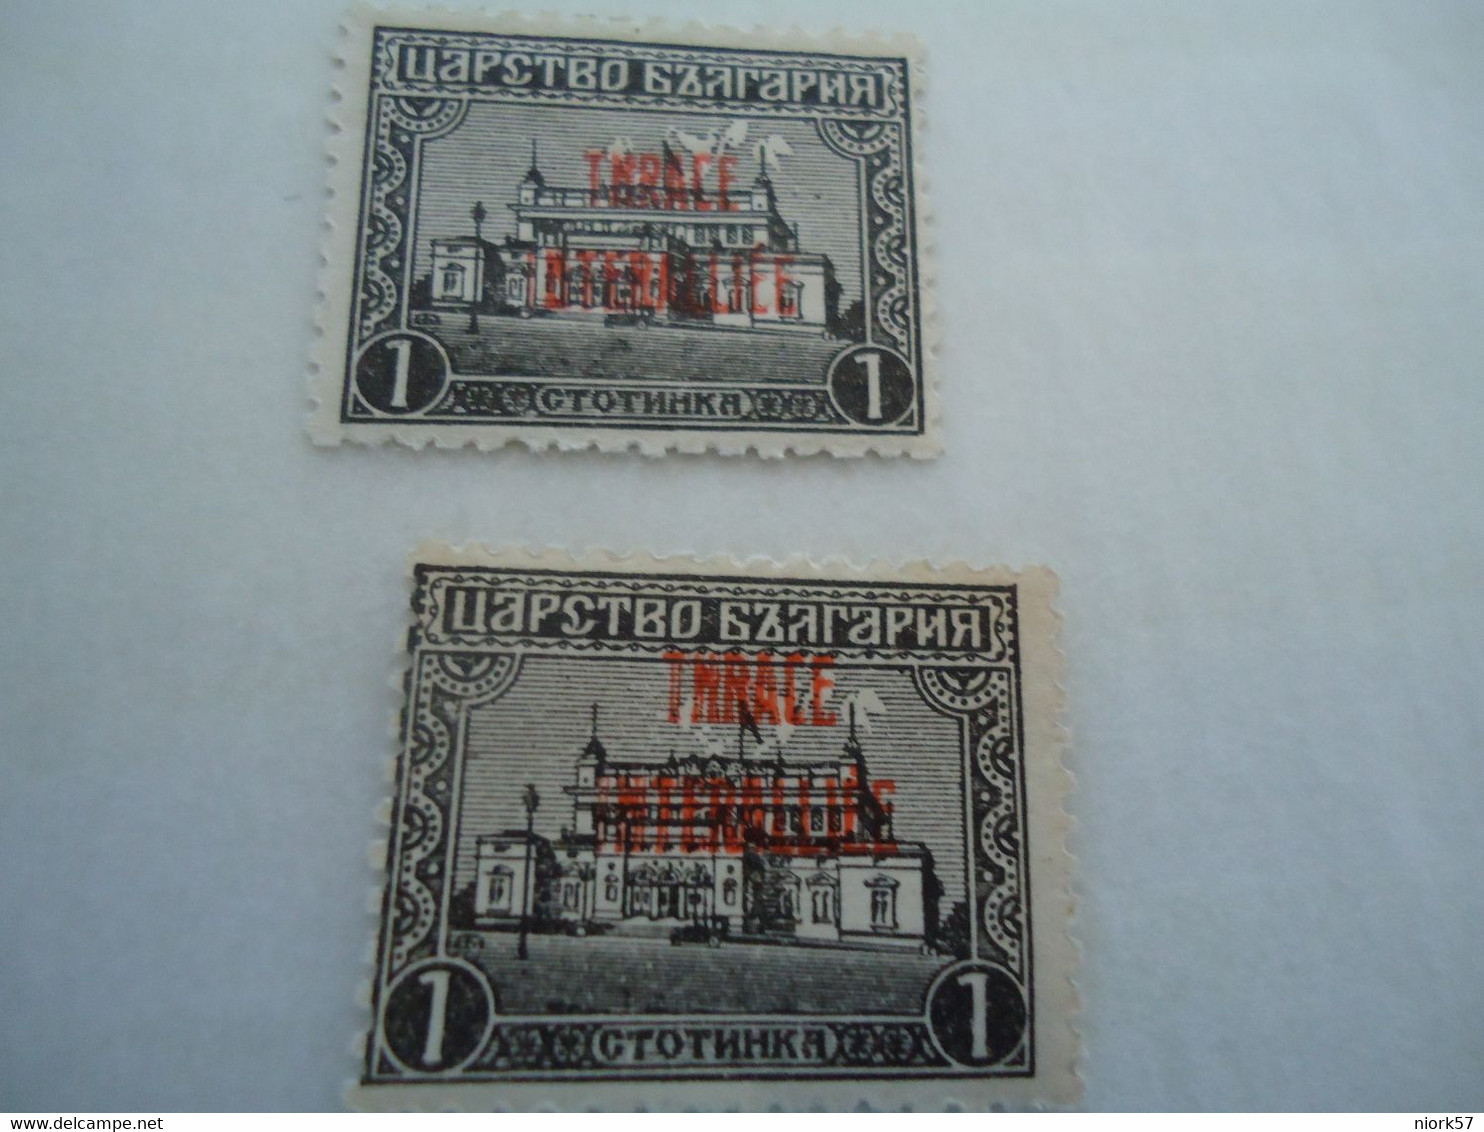 TRHACE  GREECE MNH   INVERTED L  STAMPS OVERPRINT THRACE  ΘΡΑΚΗ - Lemnos